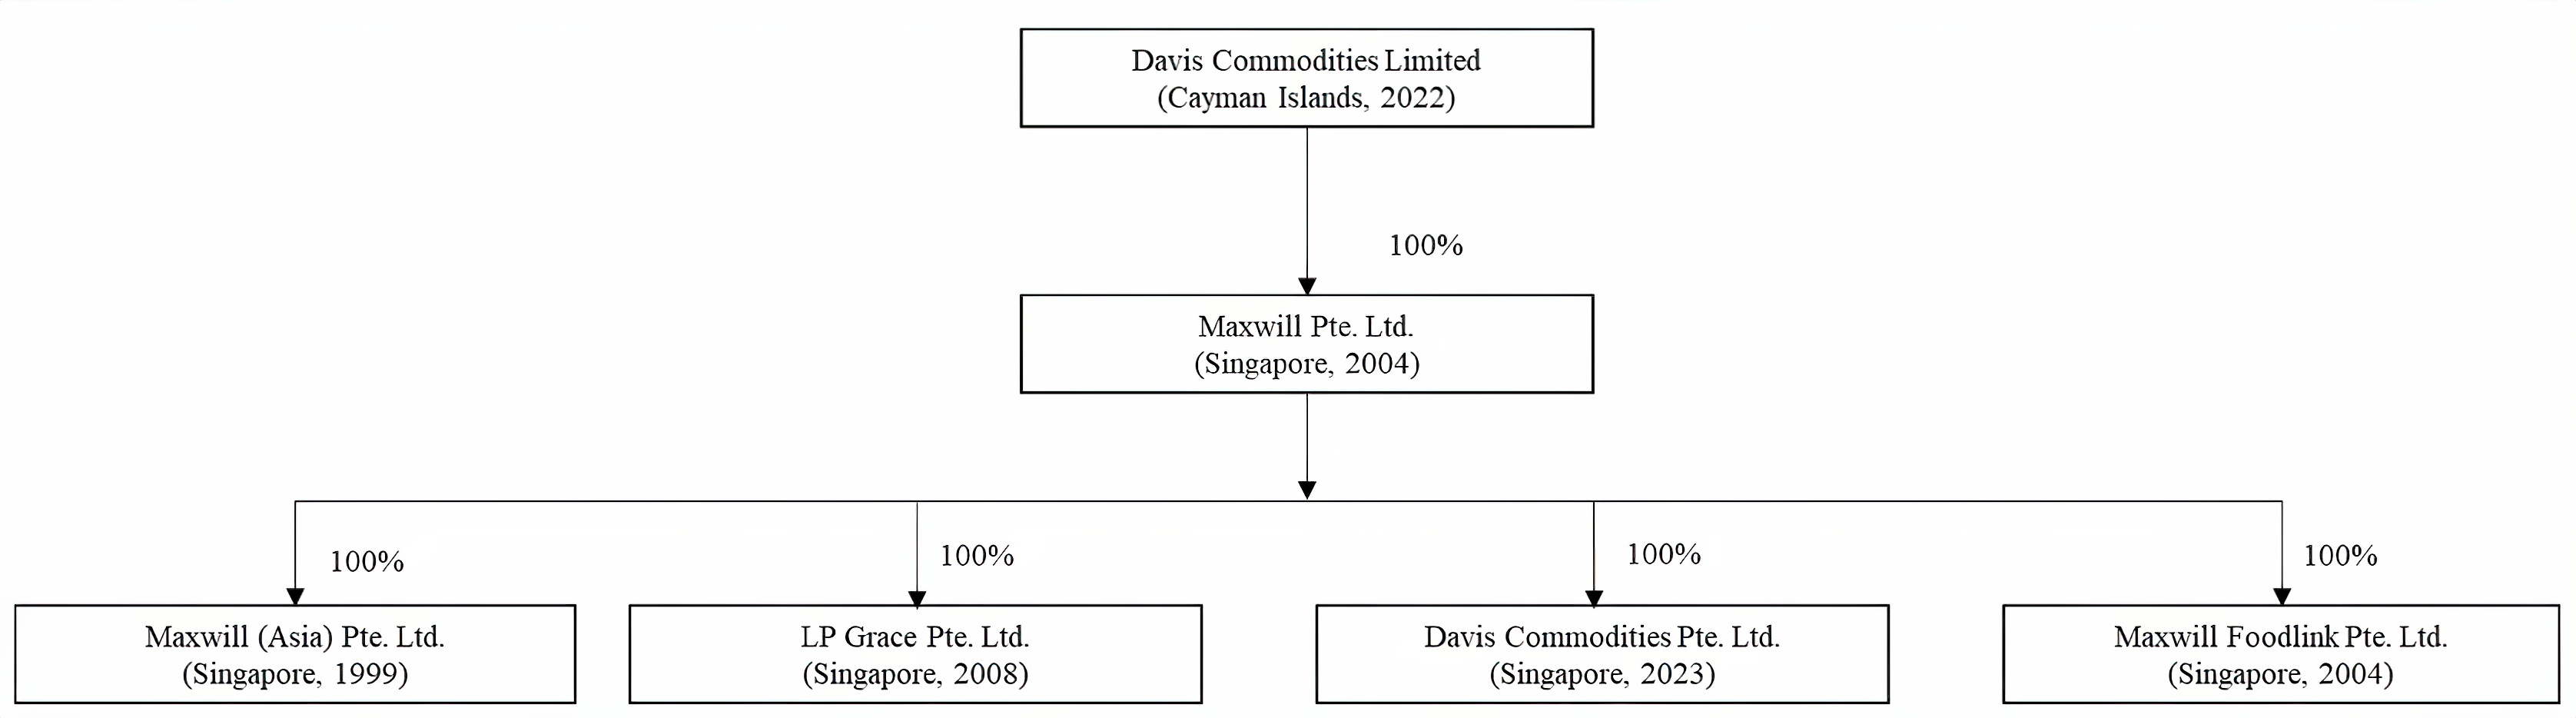 After the consolidation, the business operations of Maxwill (Asia) Pte. Ltd., LP Grace Pte. Ltd., and Maxwill Foodlink Pte. Ltd. will be brought into one operating company, Davis Commodities Pte. Ltd.